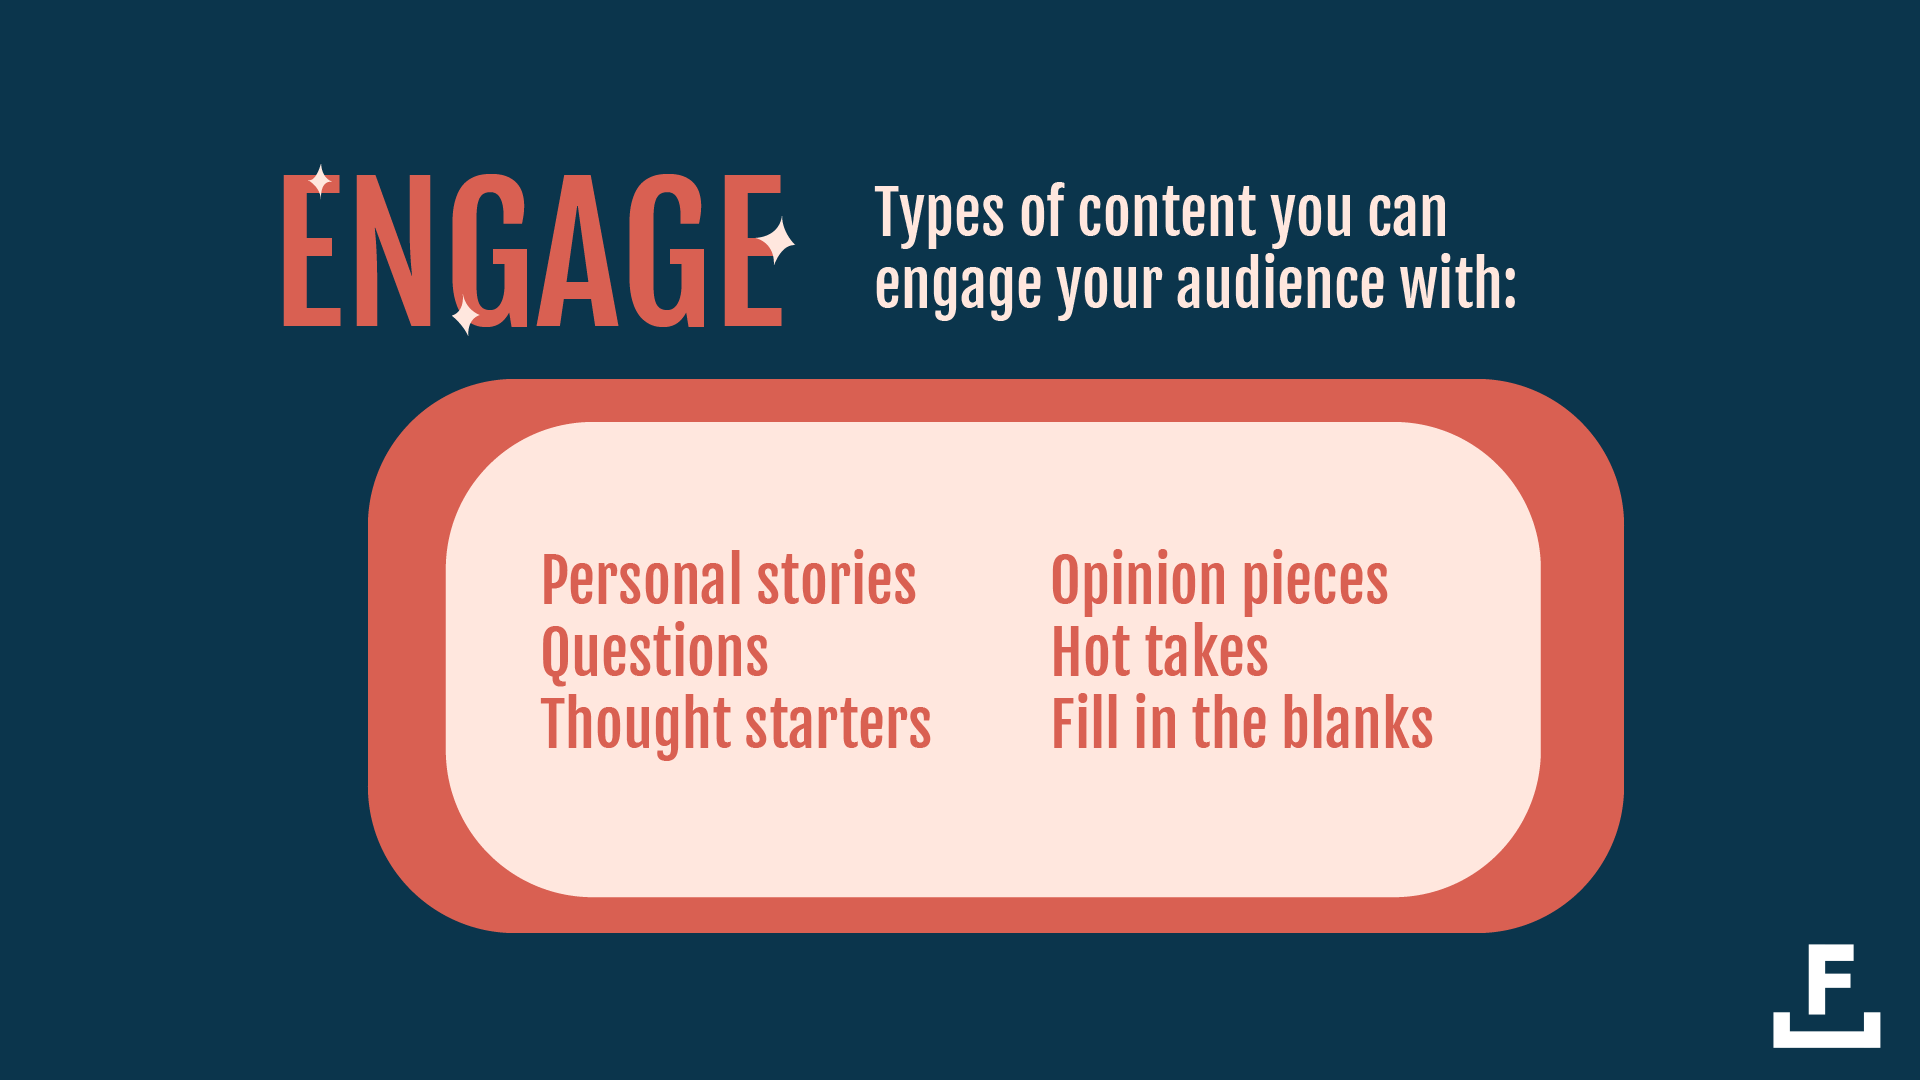 An image showing the types of content that work well to engage an audience